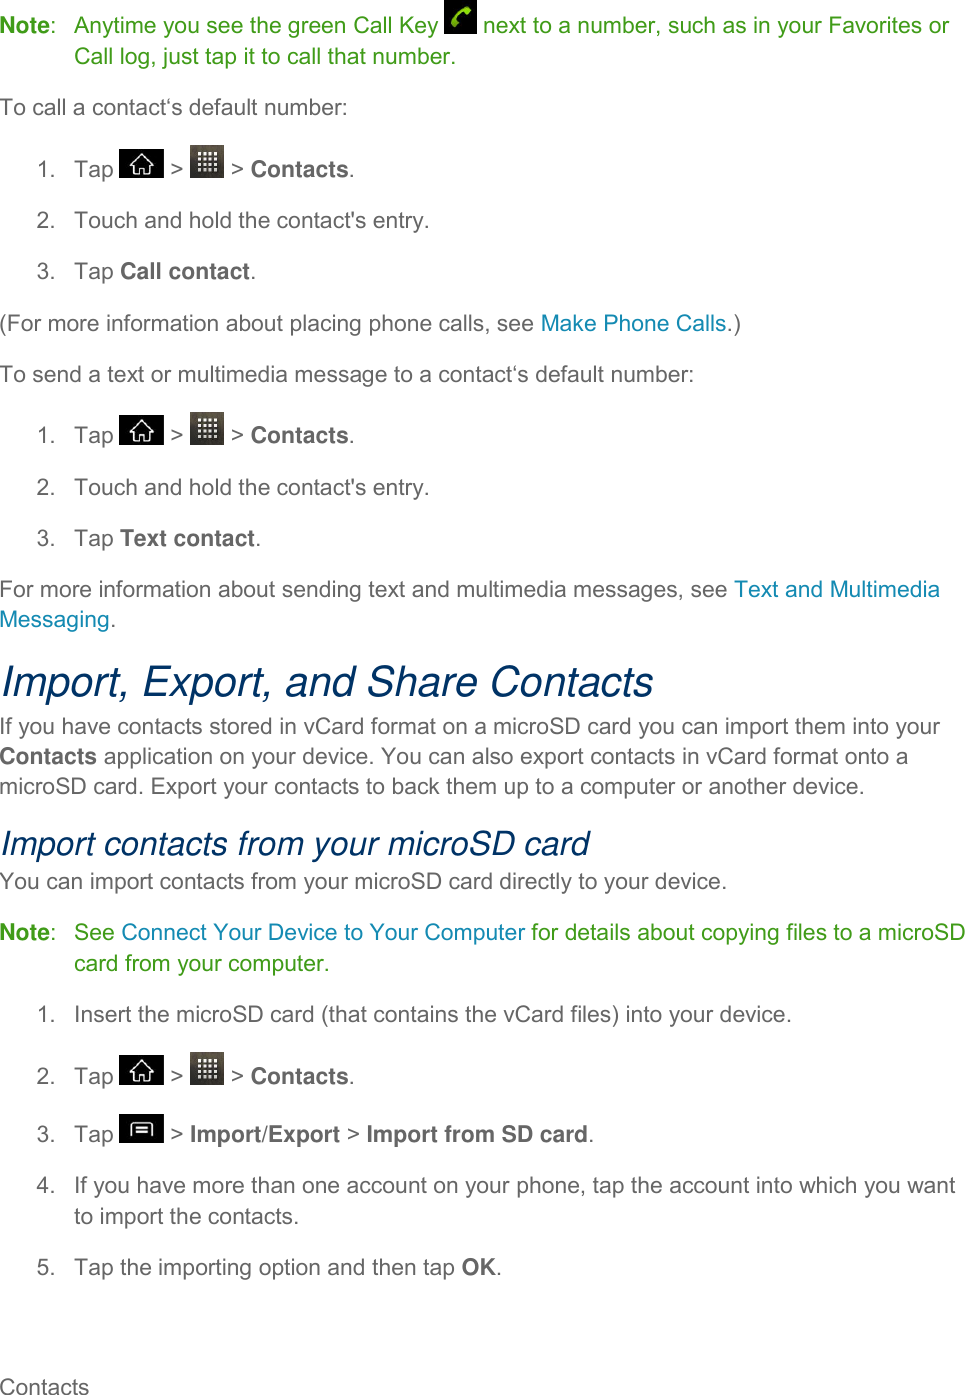 Contacts     Note:   Anytime you see the green Call Key   next to a number, such as in your Favorites or Call log, just tap it to call that number. To call a contact‘s default number: 1.  Tap   &gt;   &gt; Contacts. 2.  Touch and hold the contact&apos;s entry. 3.  Tap Call contact. (For more information about placing phone calls, see Make Phone Calls.) To send a text or multimedia message to a contact‘s default number: 1.  Tap   &gt;   &gt; Contacts. 2.  Touch and hold the contact&apos;s entry. 3.  Tap Text contact. For more information about sending text and multimedia messages, see Text and Multimedia Messaging. Import, Export, and Share Contacts If you have contacts stored in vCard format on a microSD card you can import them into your Contacts application on your device. You can also export contacts in vCard format onto a microSD card. Export your contacts to back them up to a computer or another device. Import contacts from your microSD card You can import contacts from your microSD card directly to your device. Note:   See Connect Your Device to Your Computer for details about copying files to a microSD card from your computer. 1.  Insert the microSD card (that contains the vCard files) into your device. 2.  Tap   &gt;   &gt; Contacts. 3.  Tap   &gt; Import/Export &gt; Import from SD card. 4.  If you have more than one account on your phone, tap the account into which you want to import the contacts. 5.  Tap the importing option and then tap OK. 